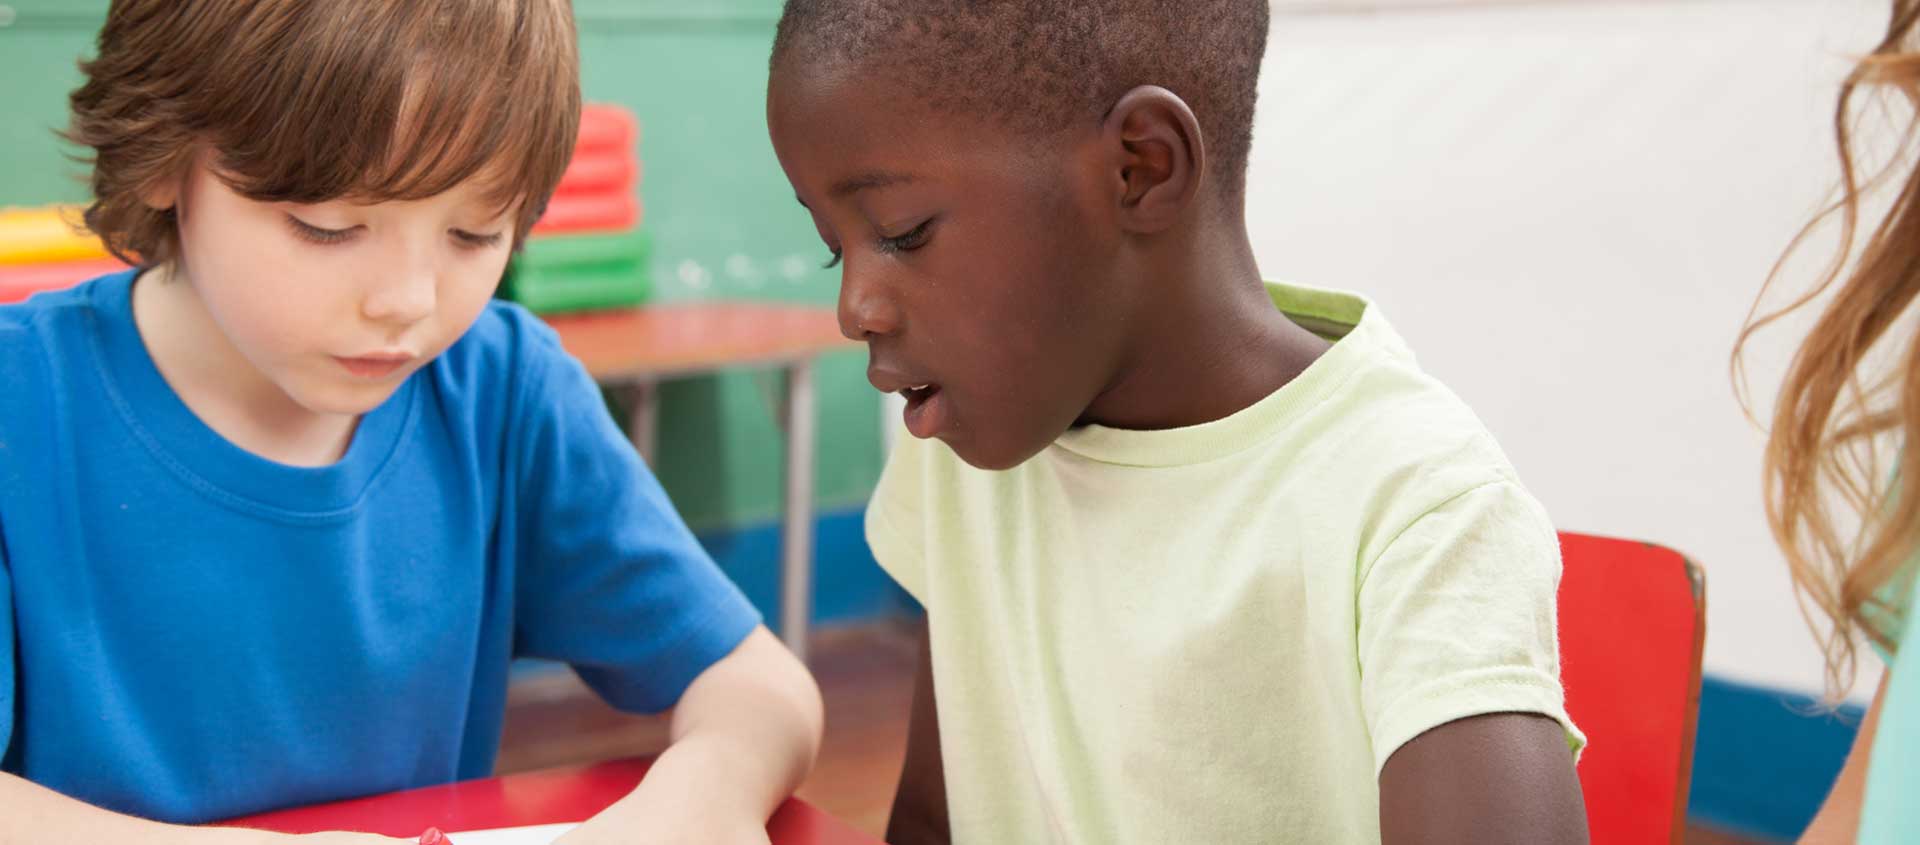 A Caucasian boy and a Black American boy are seated at a classroom table.